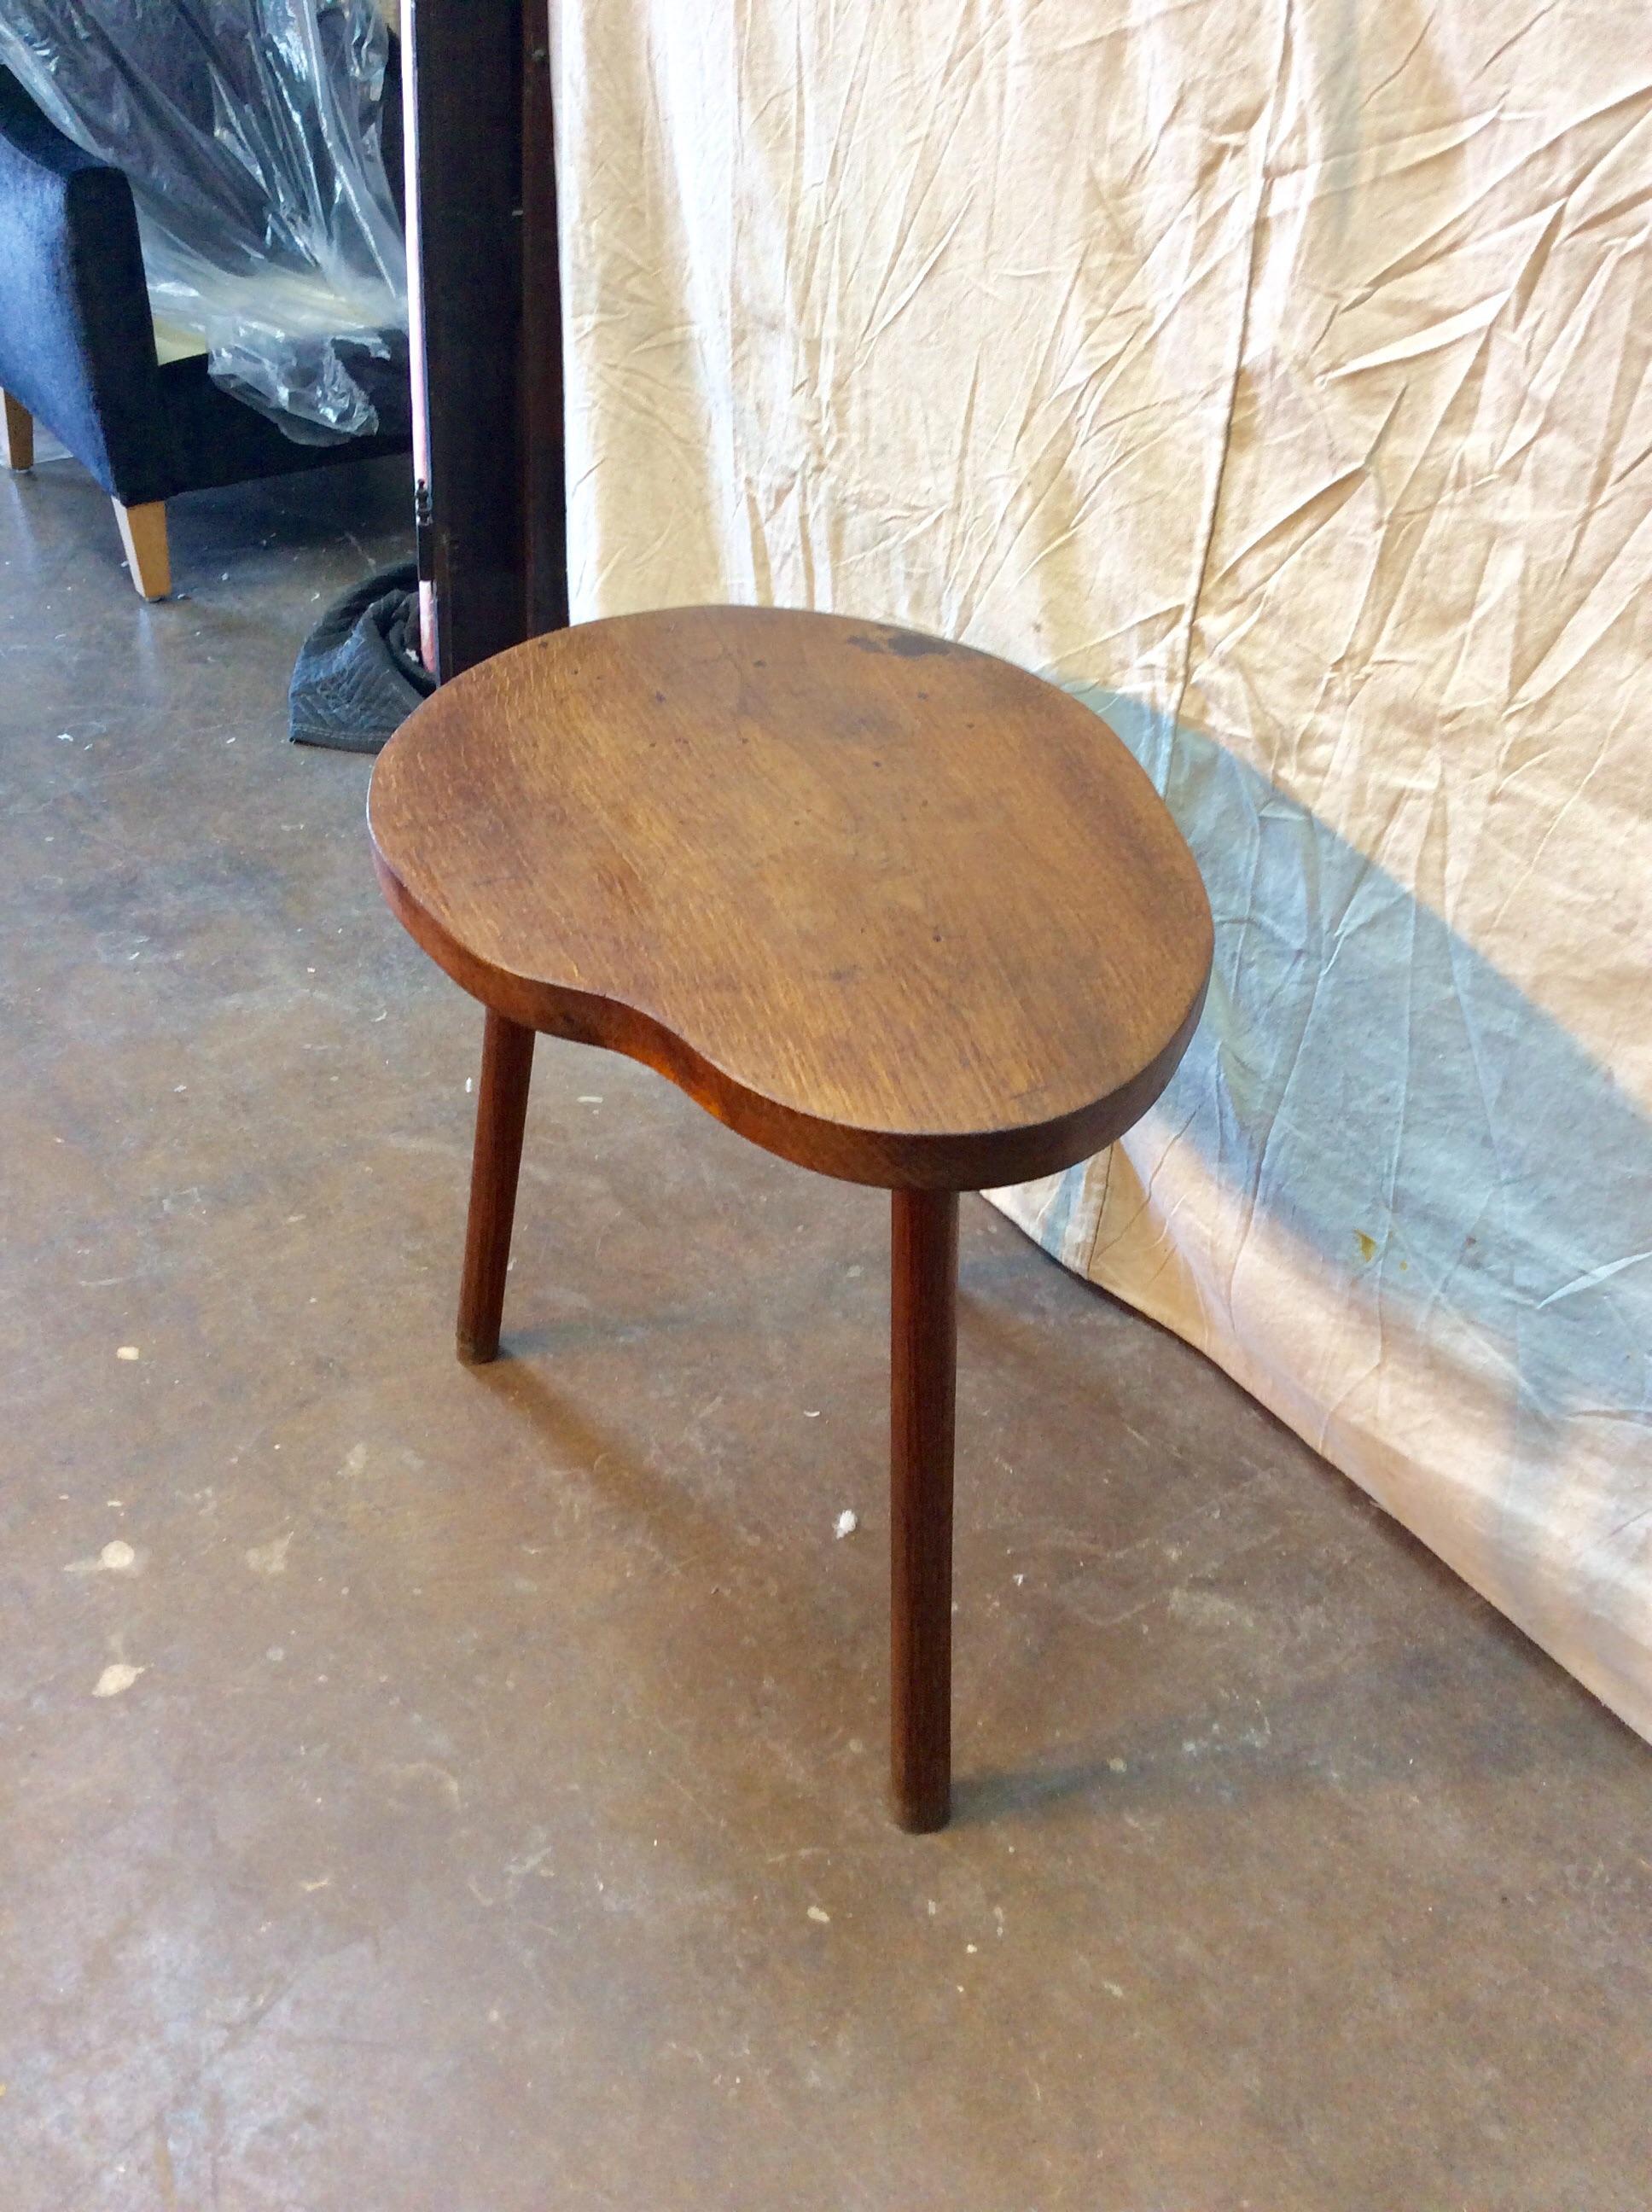 Hand-Crafted Mid-20th Century French Oak Biomorphic Side Table